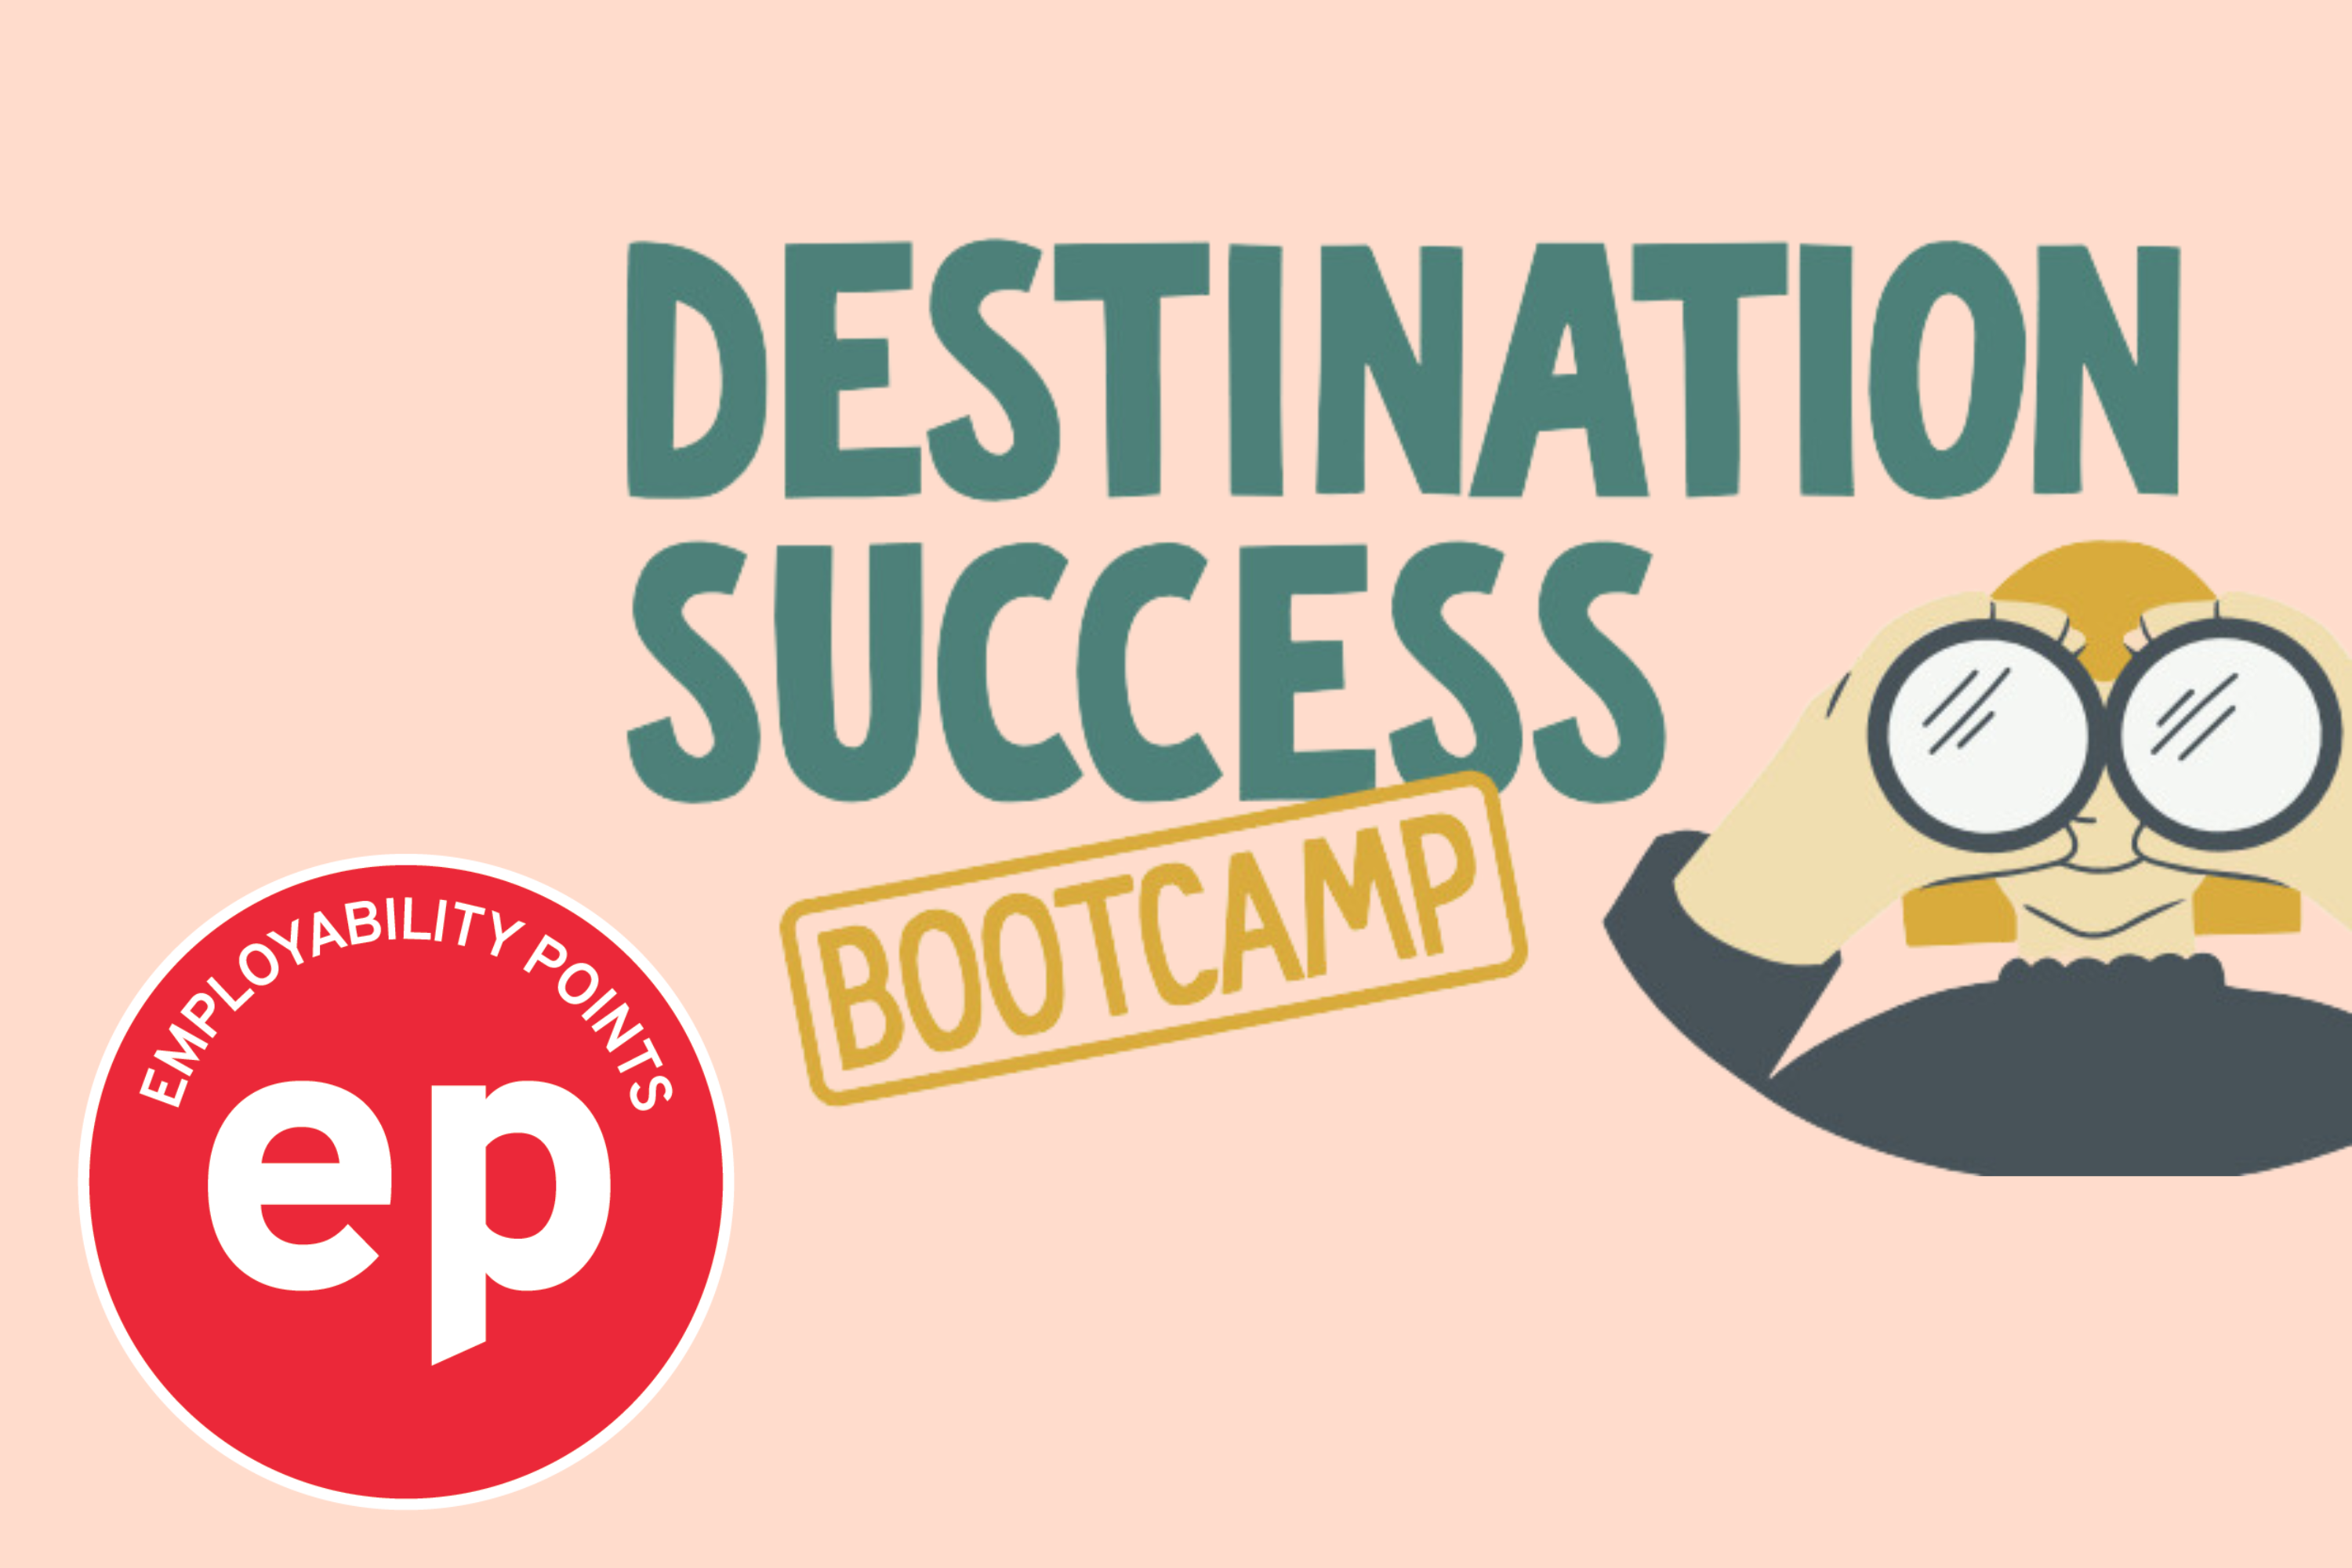 Destination Success Bootcamp and Employability Points logos.